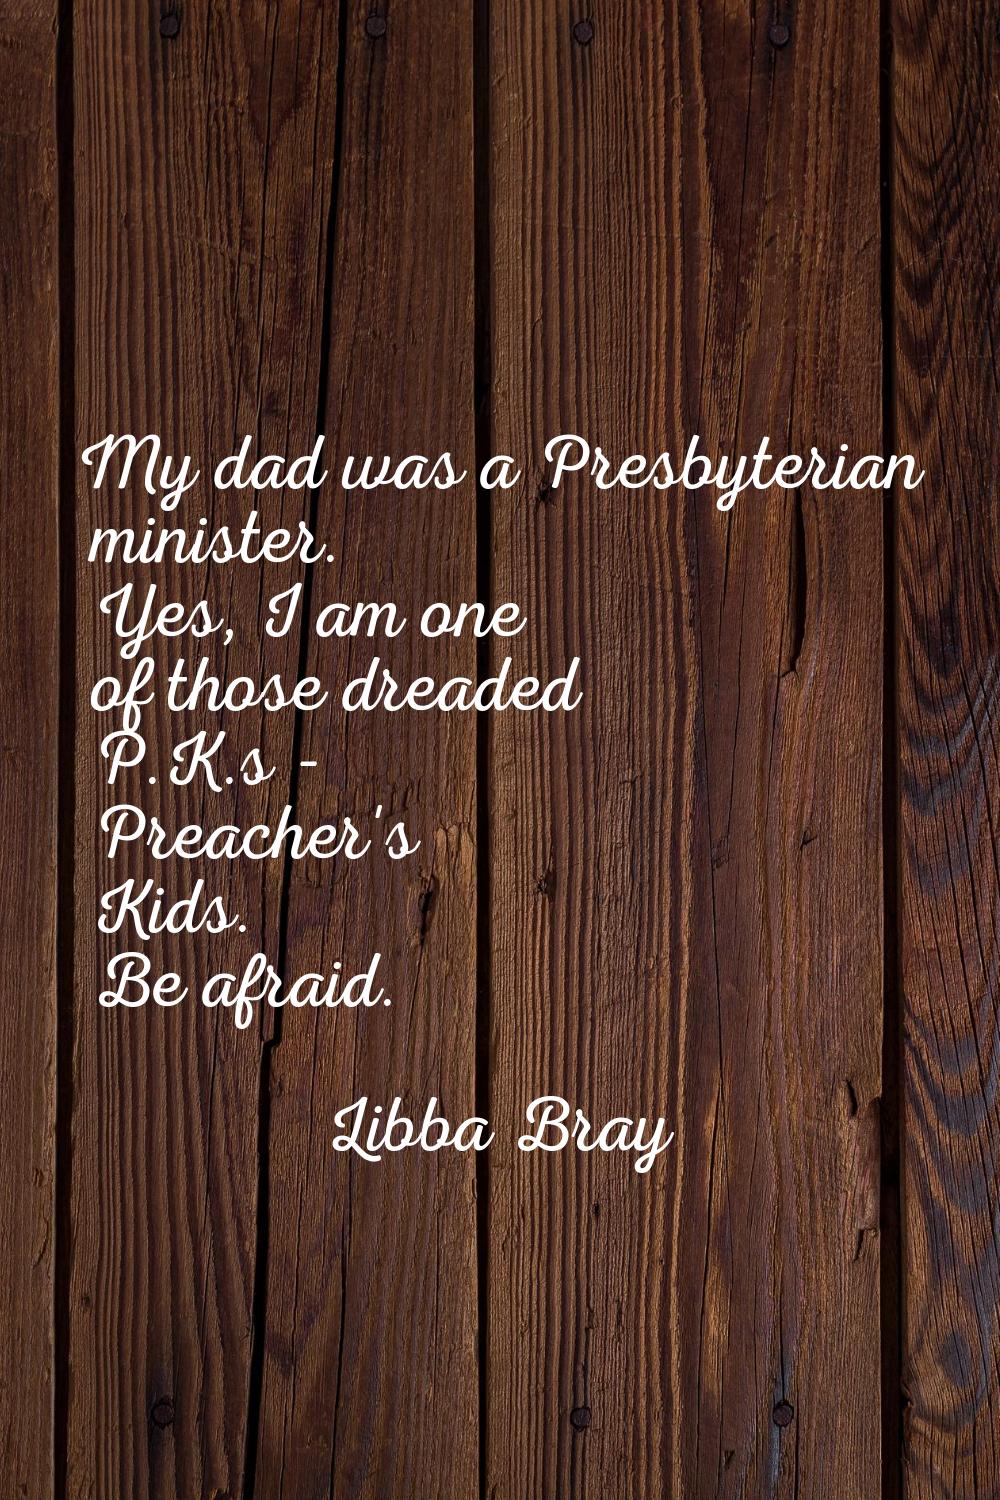 My dad was a Presbyterian minister. Yes, I am one of those dreaded P.K.s - Preacher's Kids. Be afra